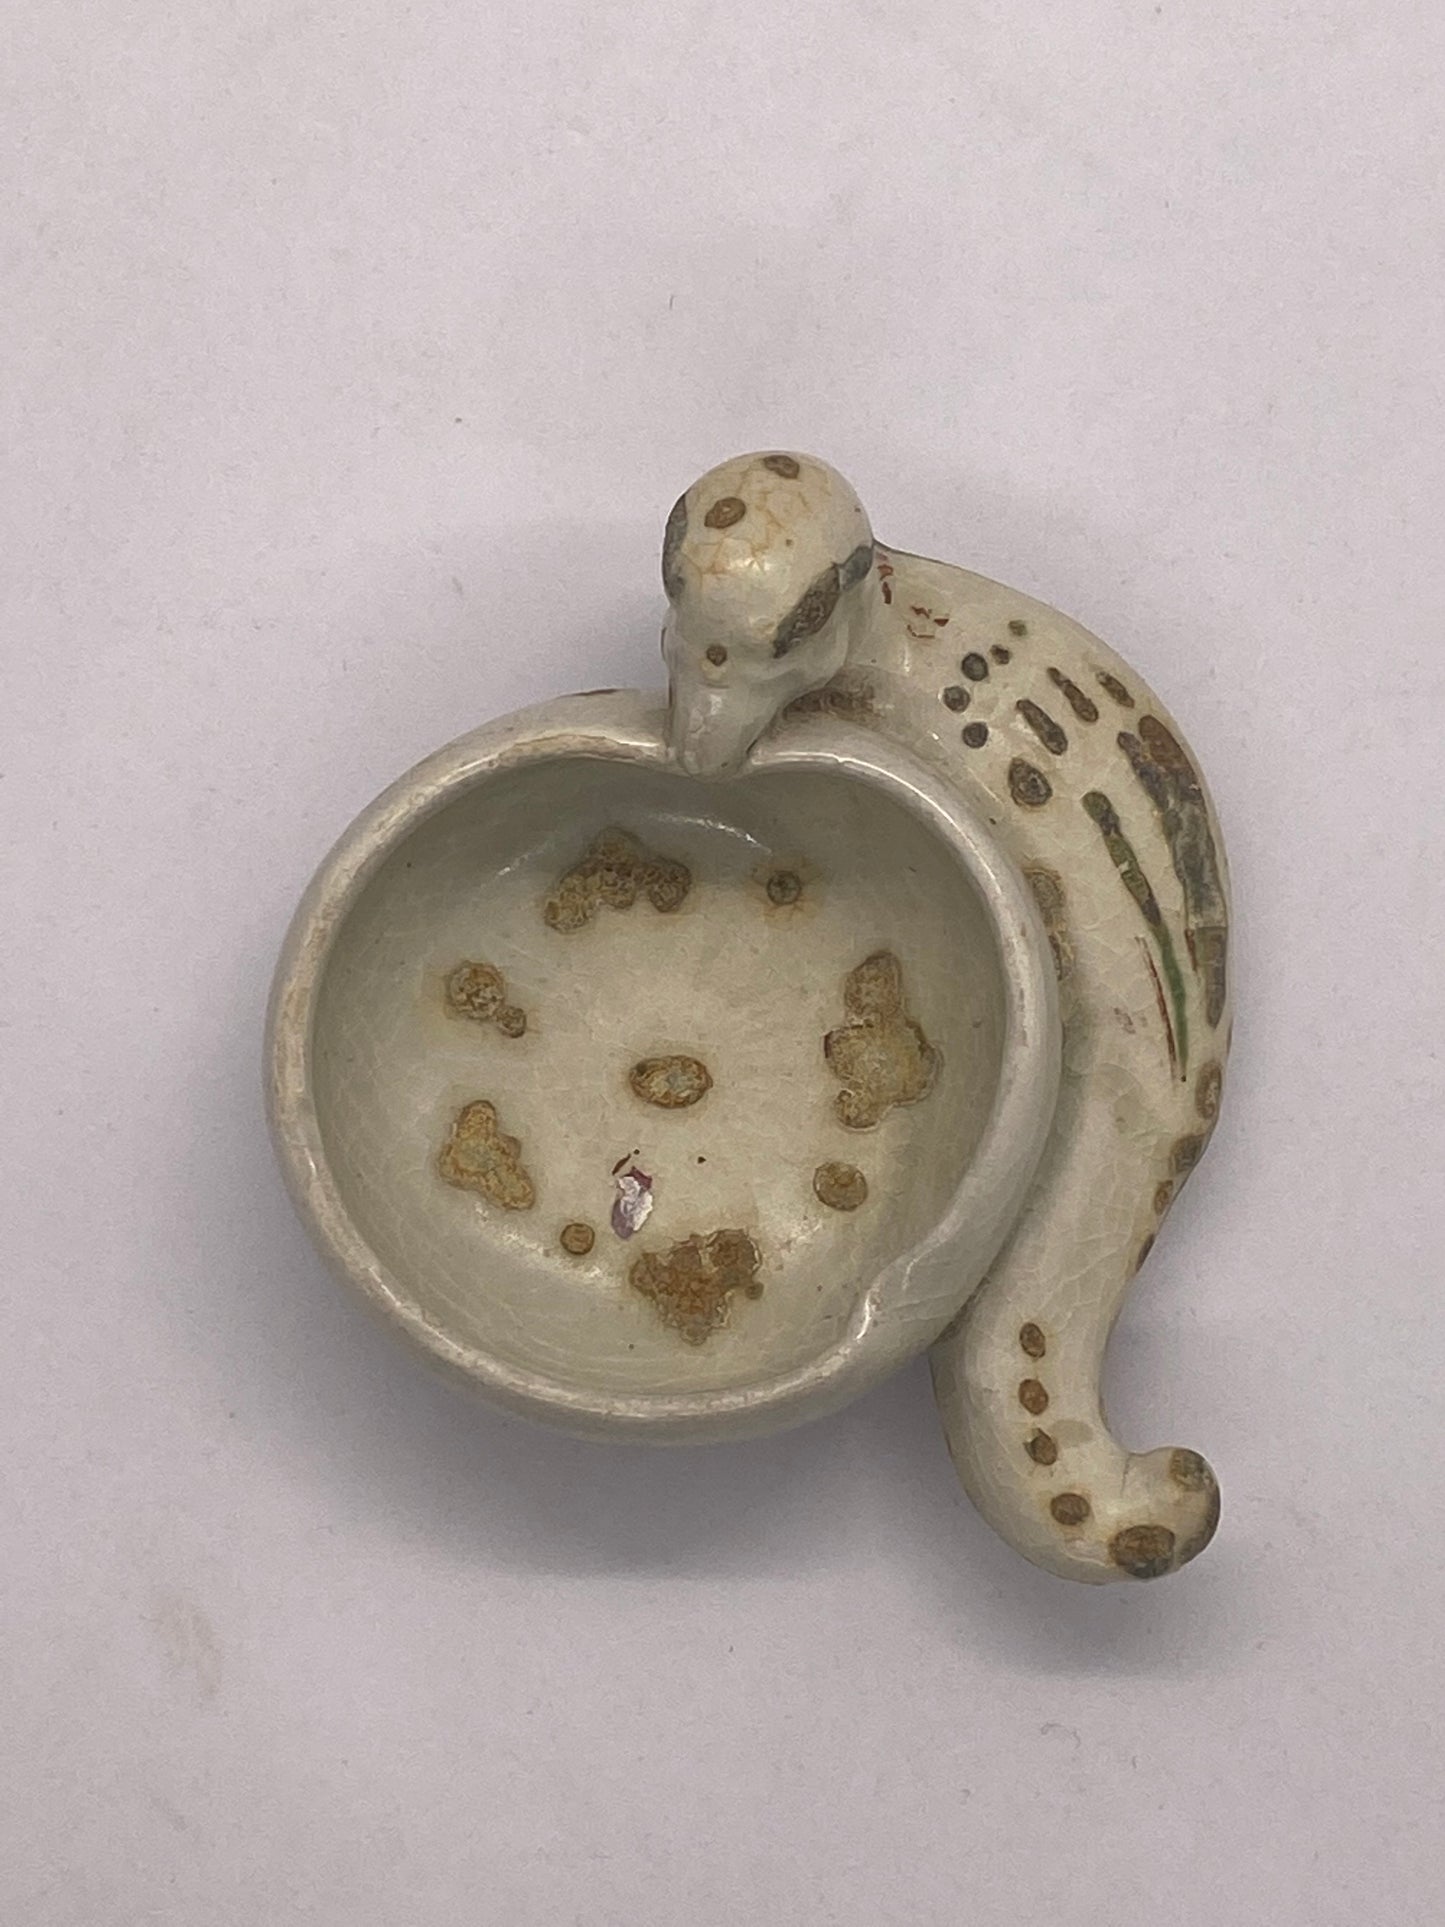 Rare 15th century Hoi An Hoard Parrot and Peach Figural Brush Washer